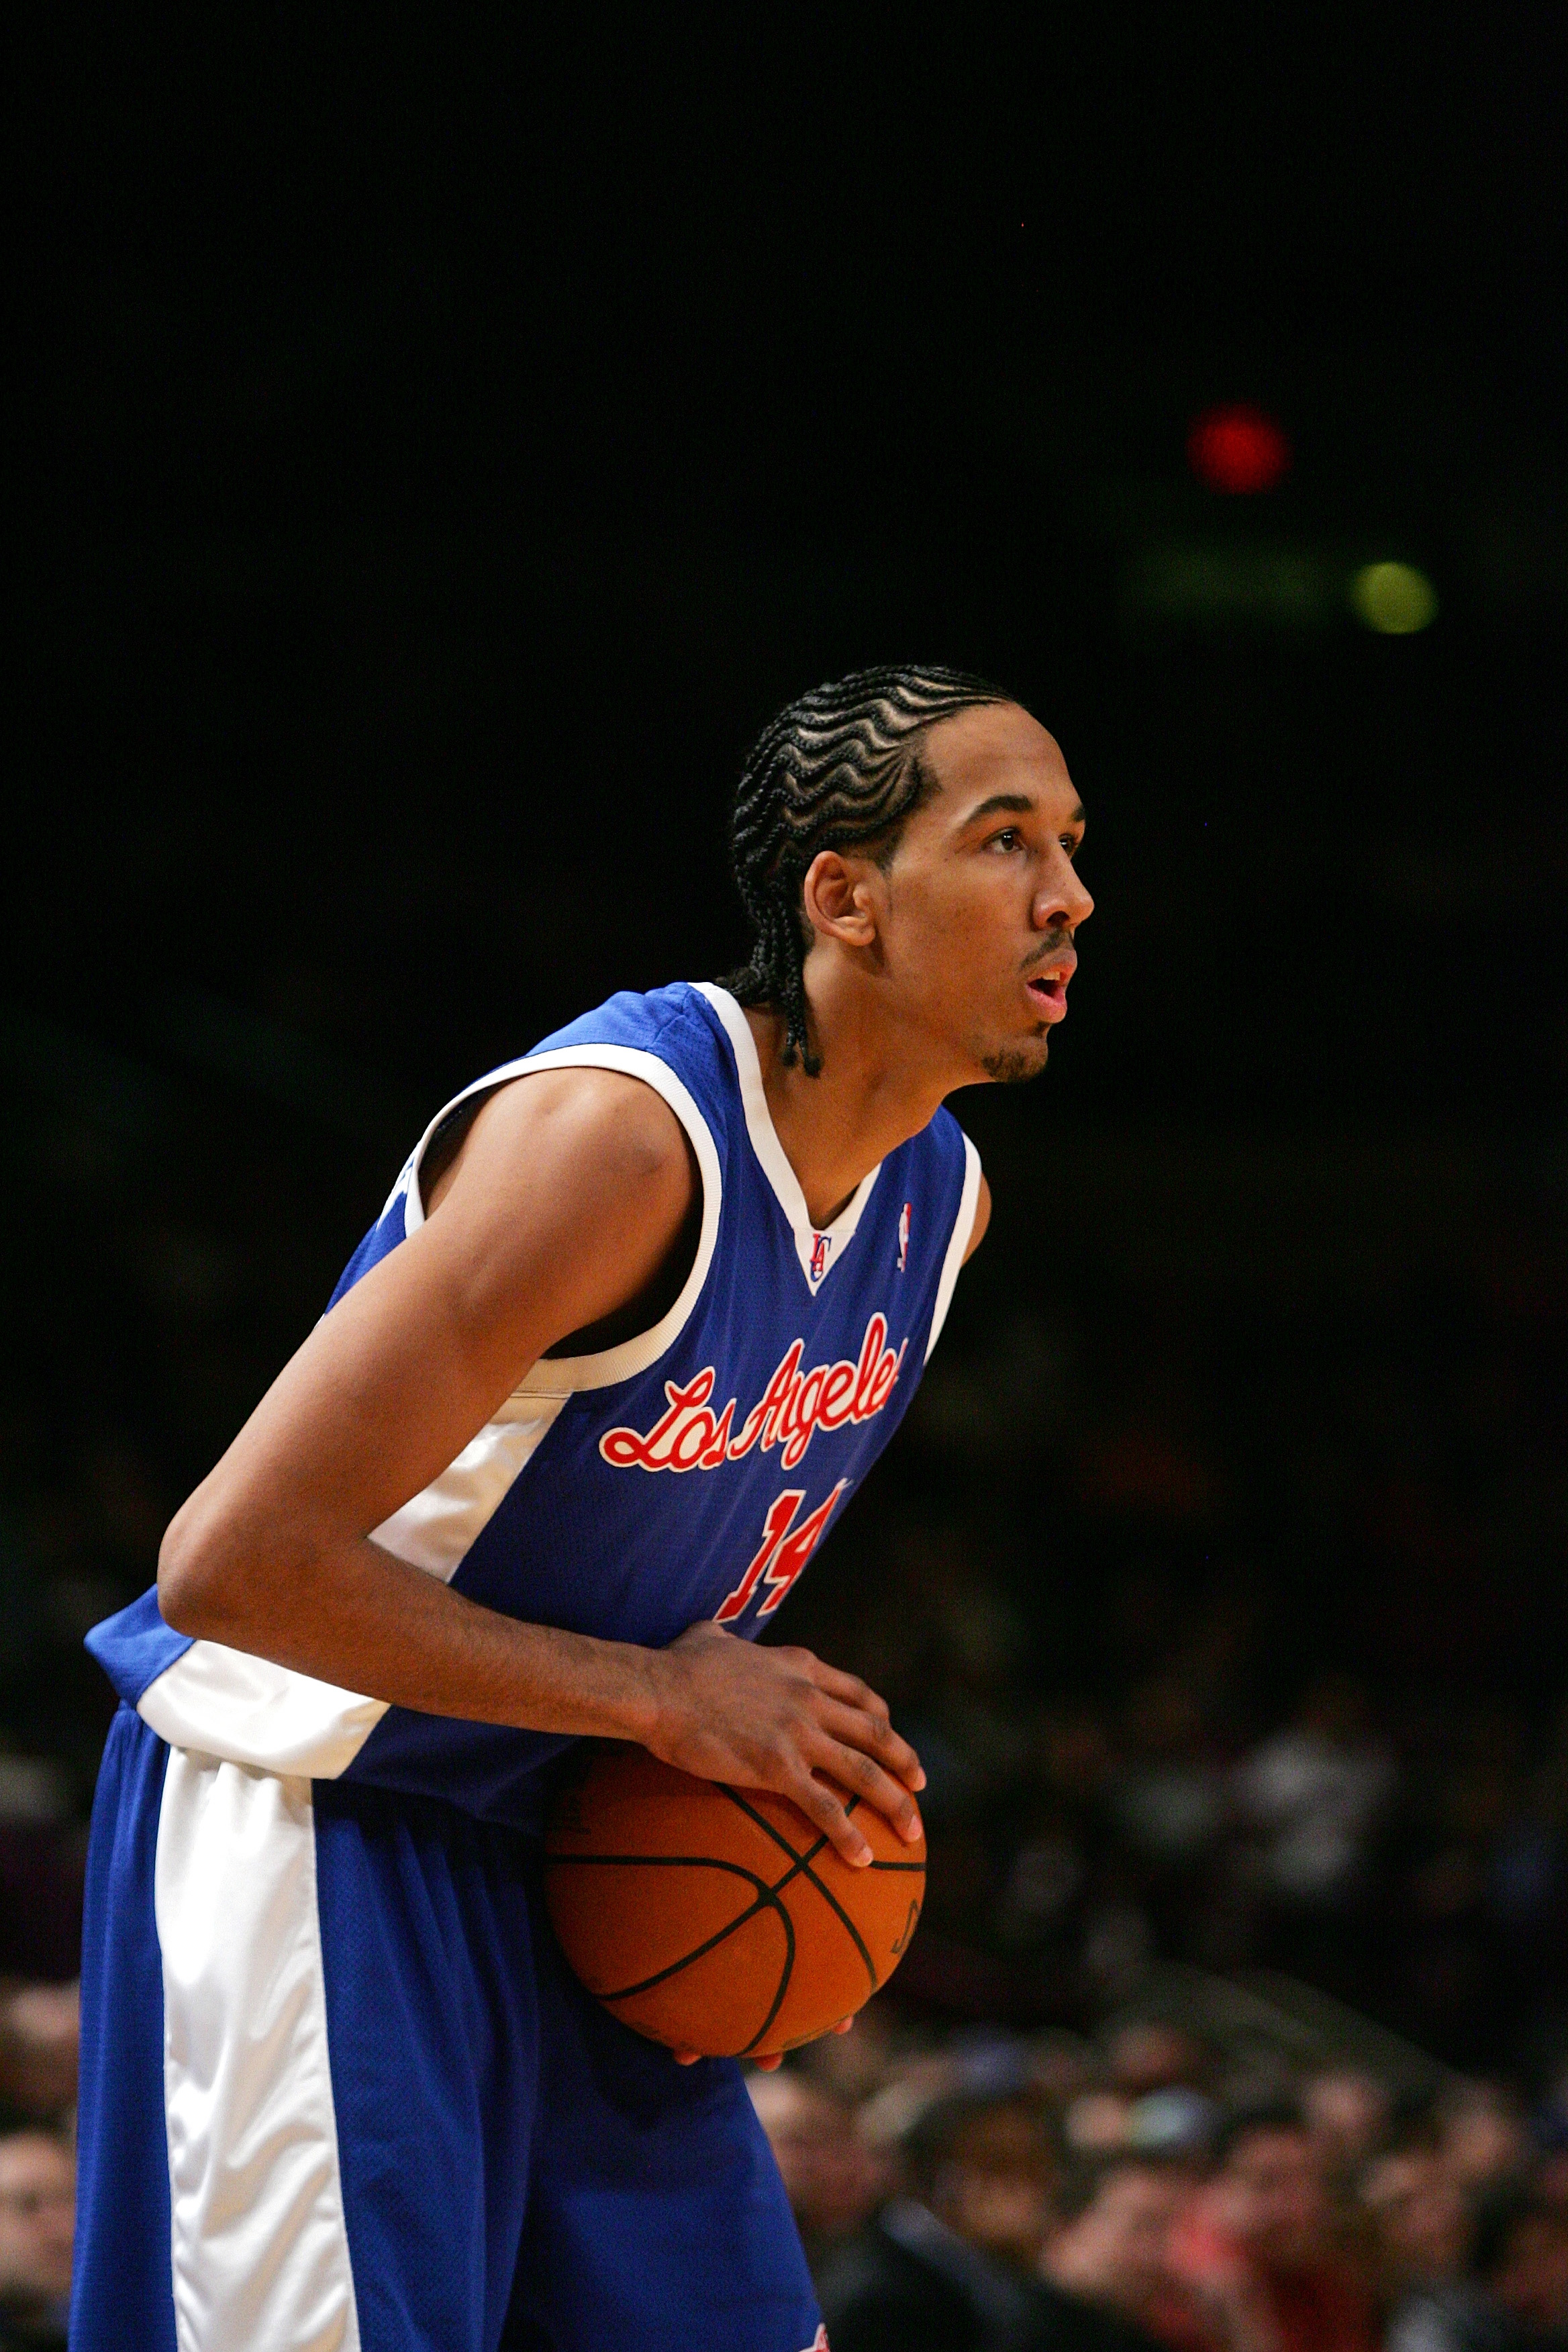 NEW YORK - FEBRUARY 06:  Shaun Livingston #14 of the Los Angeles Clippers looks to move the ball against the New York Knicks during the game on February 6, 2007 at Madison Square Garden in New York City.  The Knicks won 102-90. NOTE TO USER: User expressl